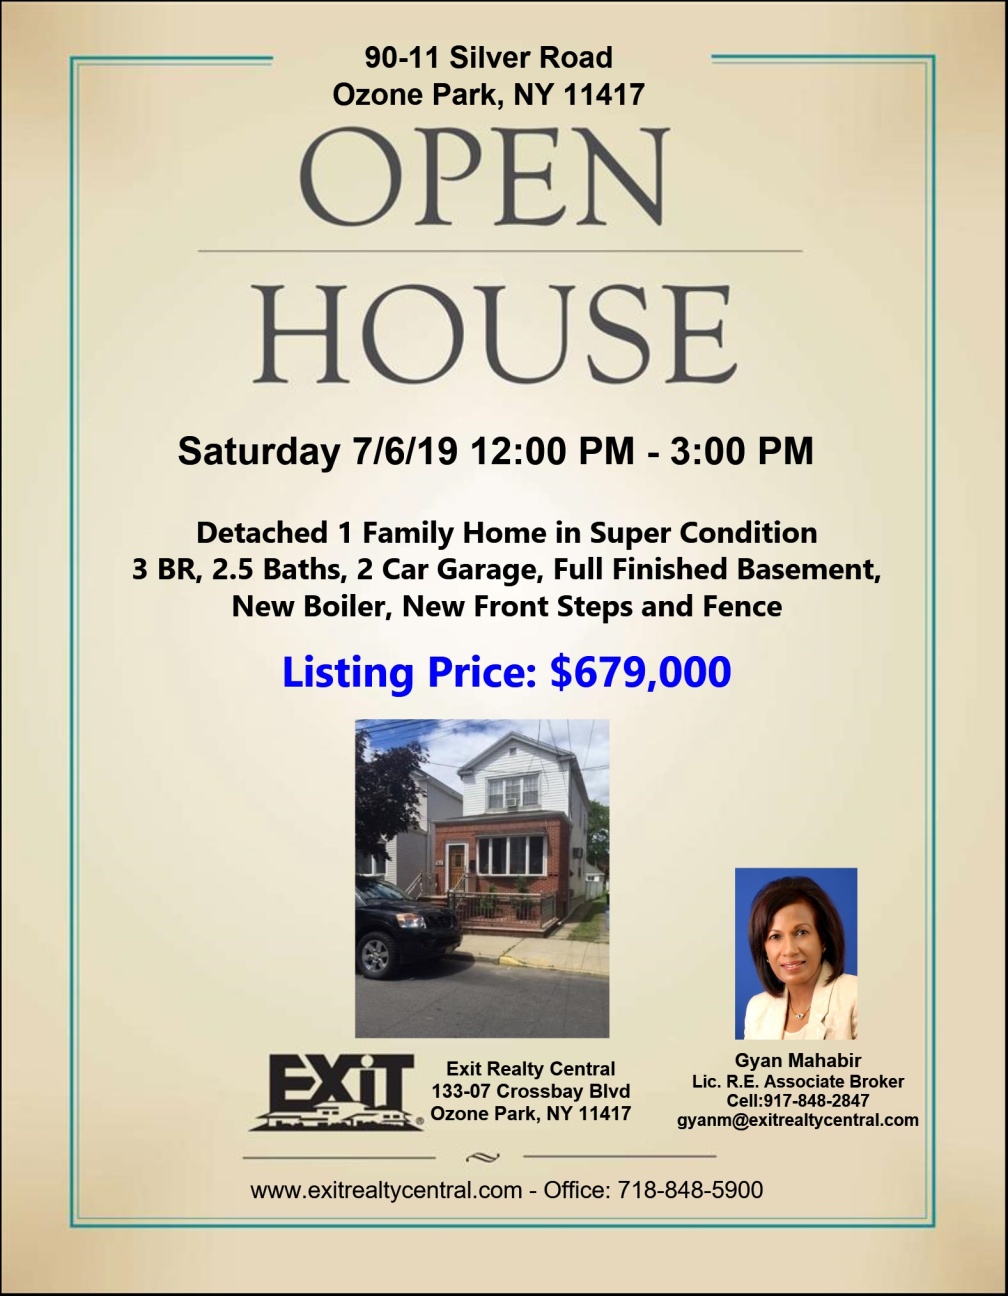 Open House in Ozone Park 7/6 12-3pm